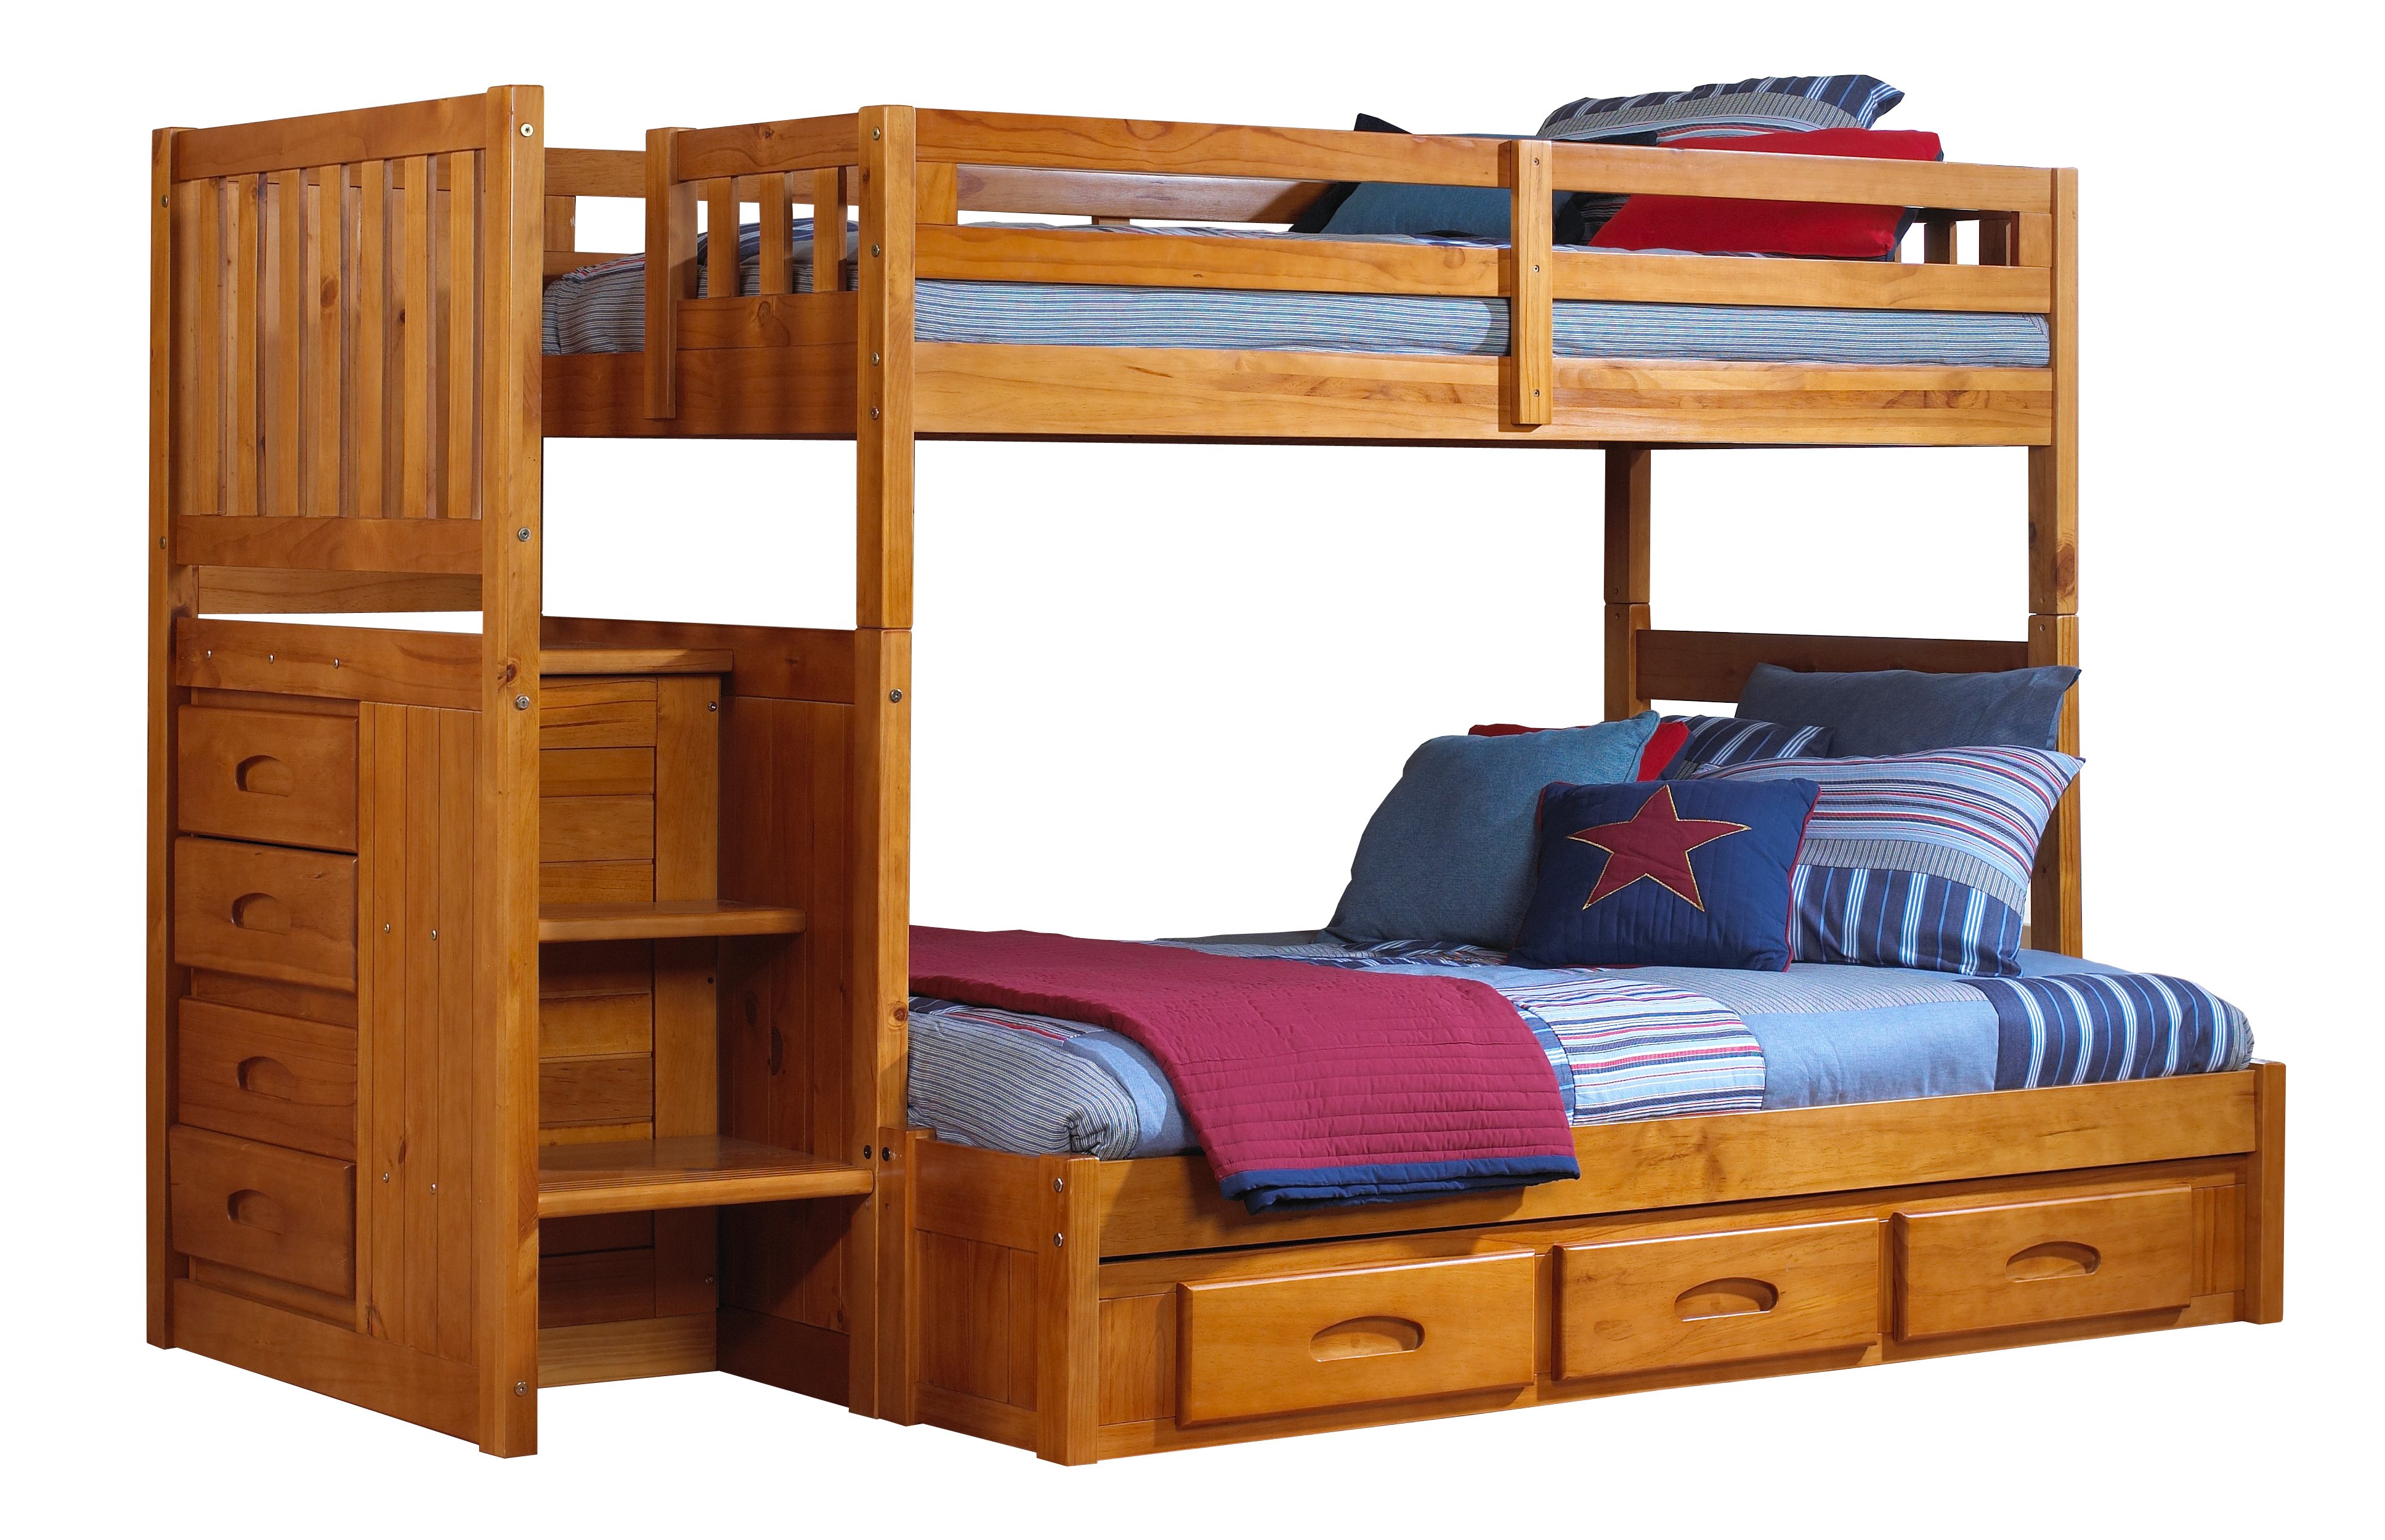 Honey Staircase Bunk Bed, Natural Finish Bunk Beds